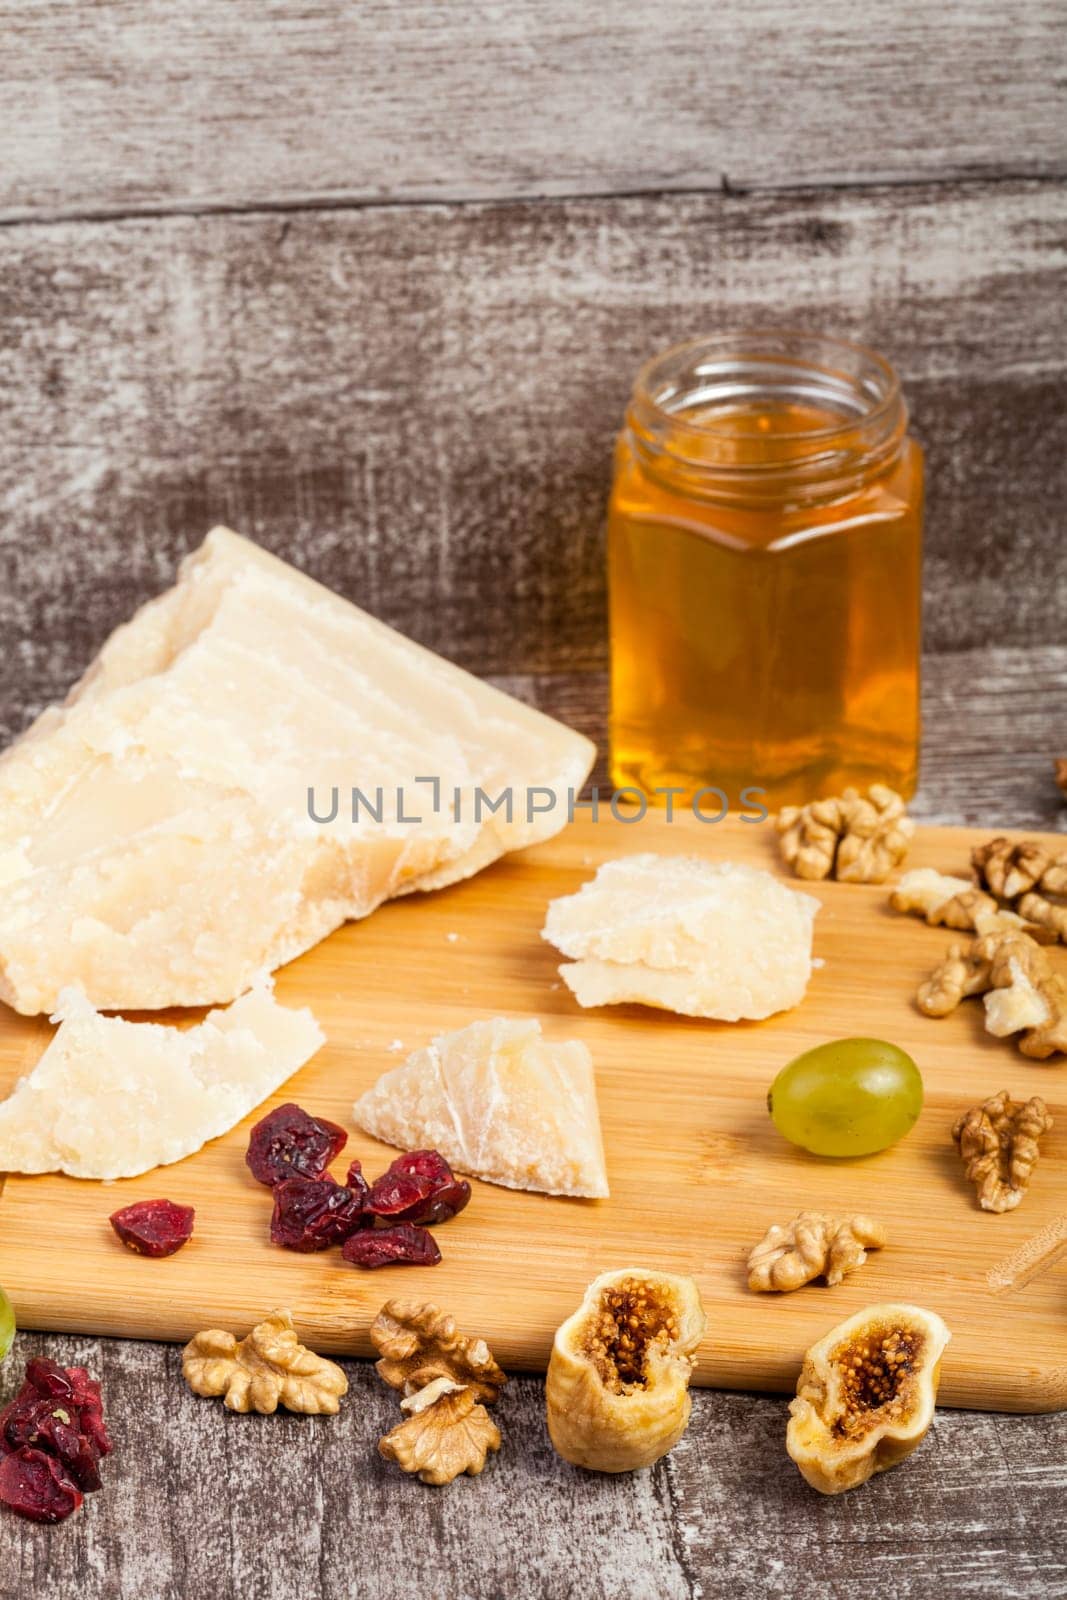 Fruits, grapes, cheese and honey on wooden background by DCStudio